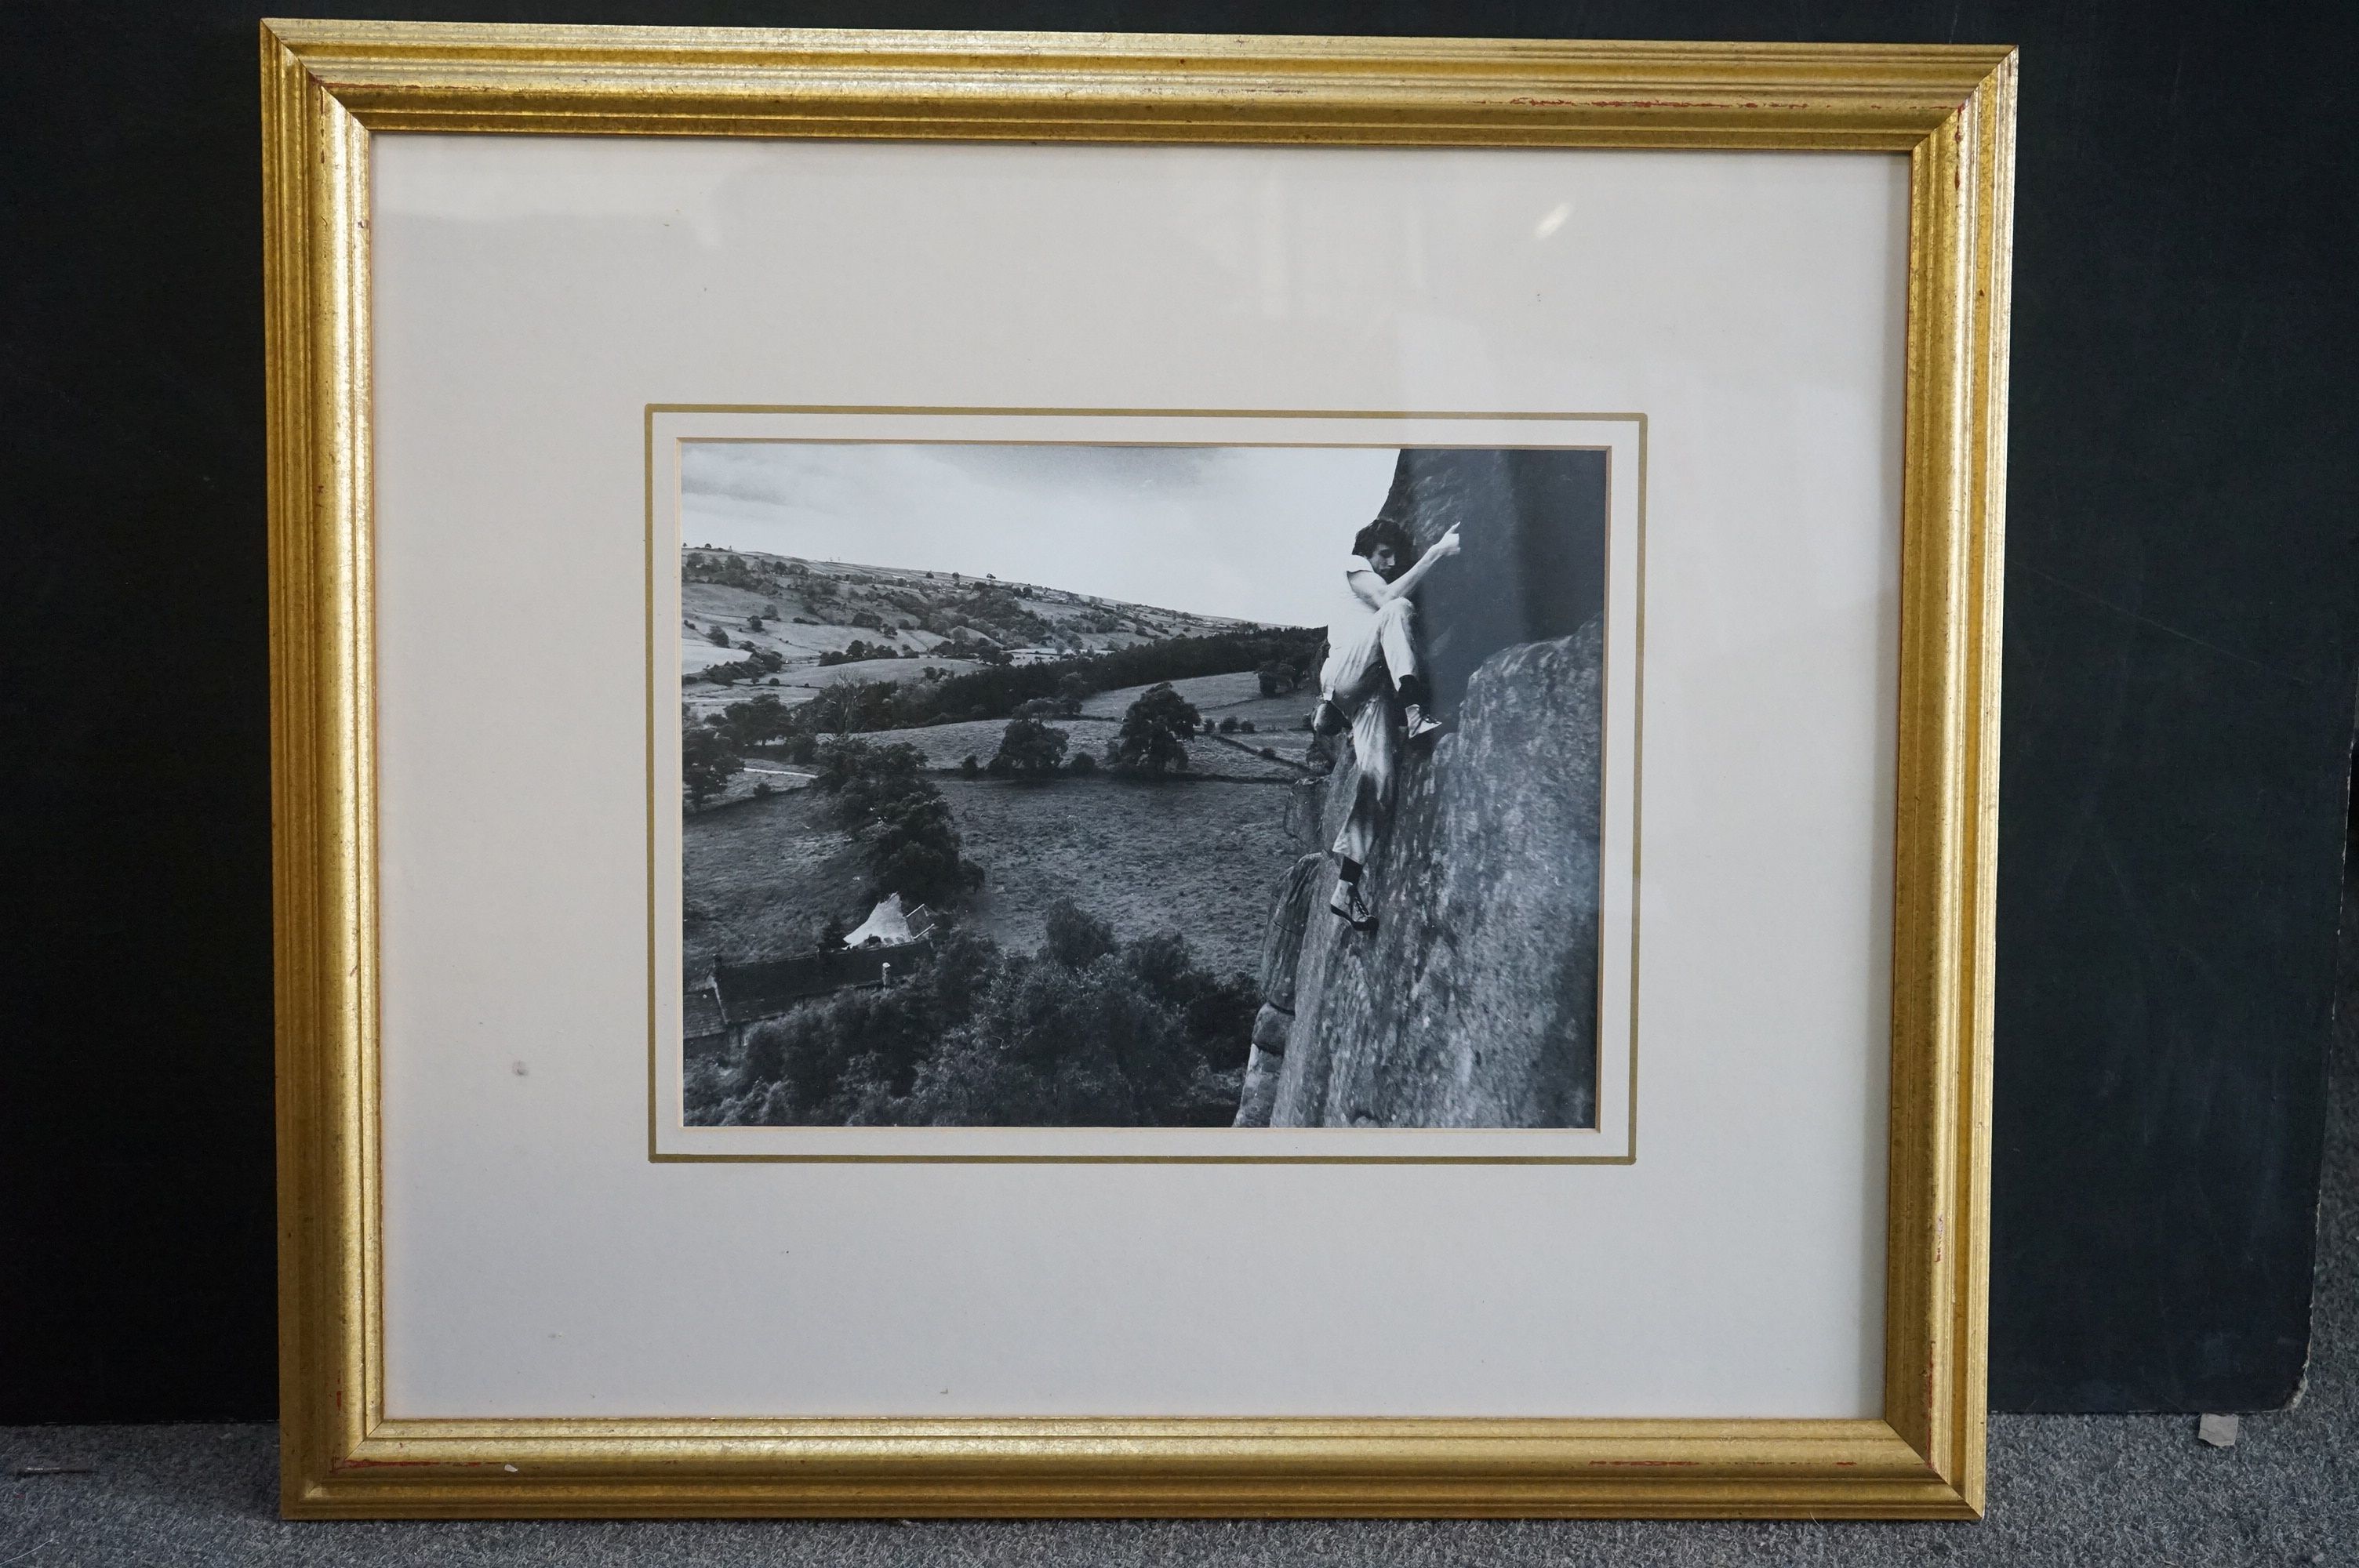 A large quantity of black and white mountaineering photographs with mountain Gallery hand written - Image 19 of 27